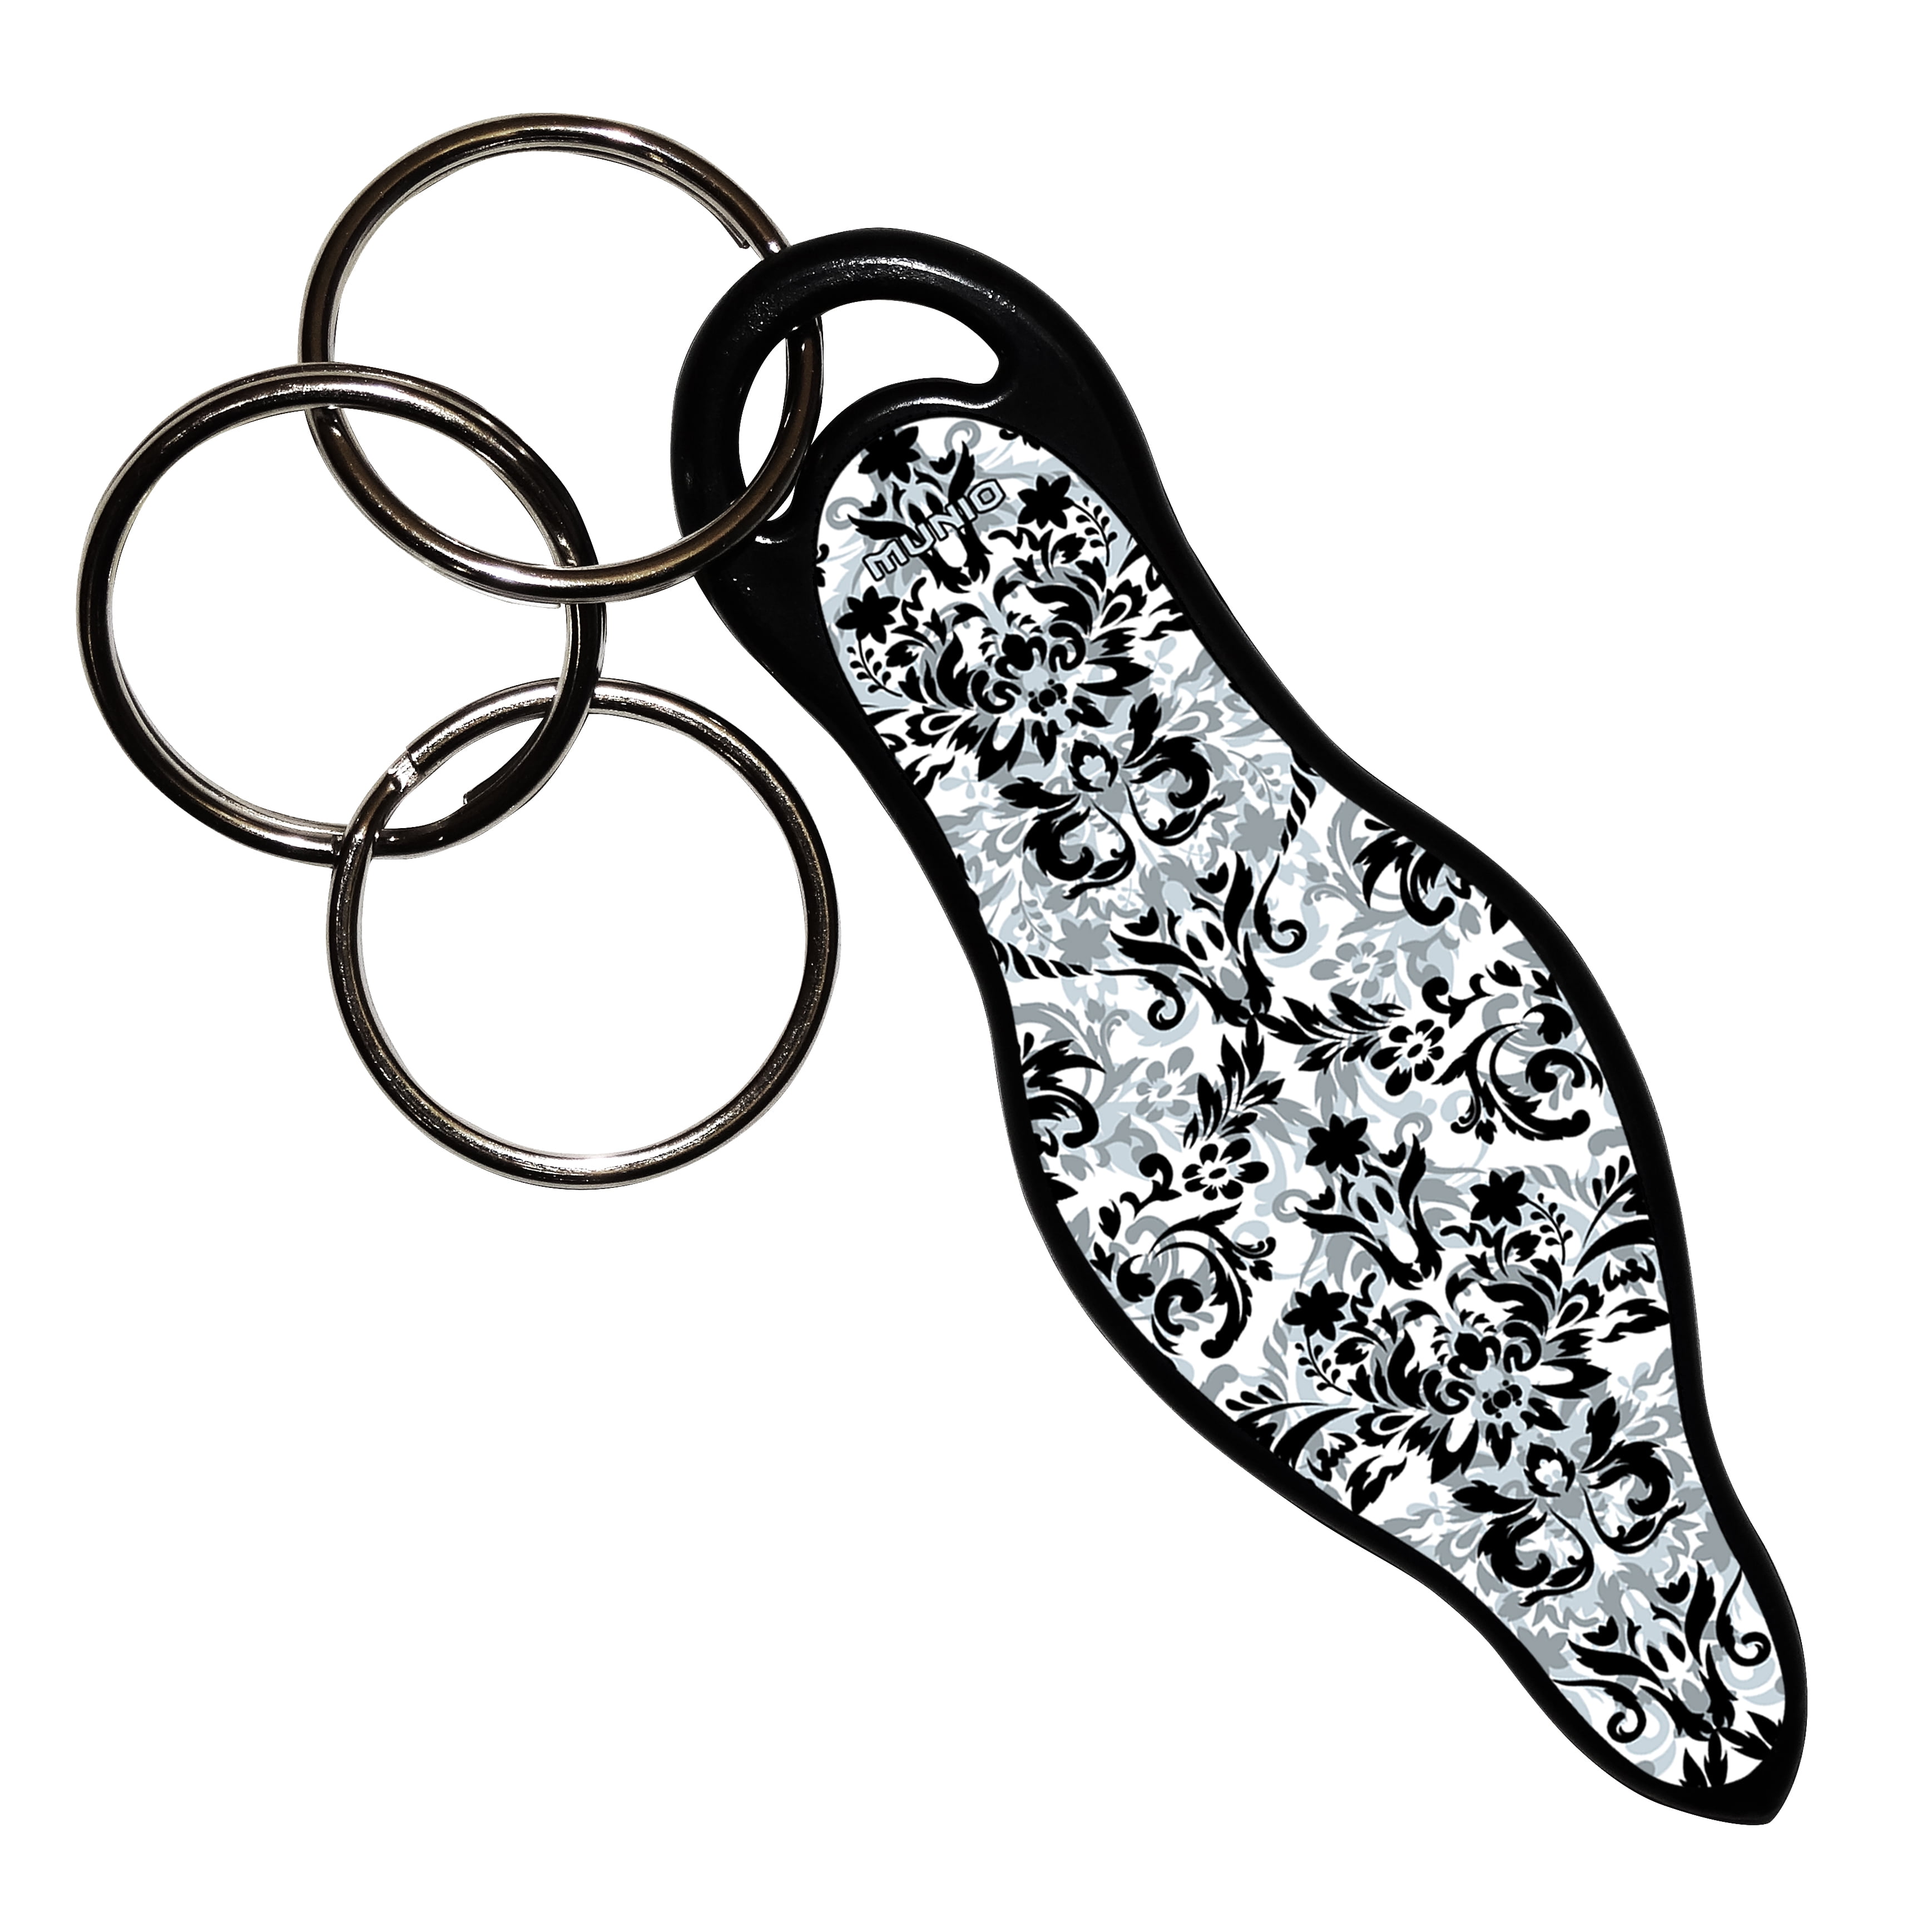 MUNIO Self Defense Kubaton Keychain with Ebook, Legal in all States 